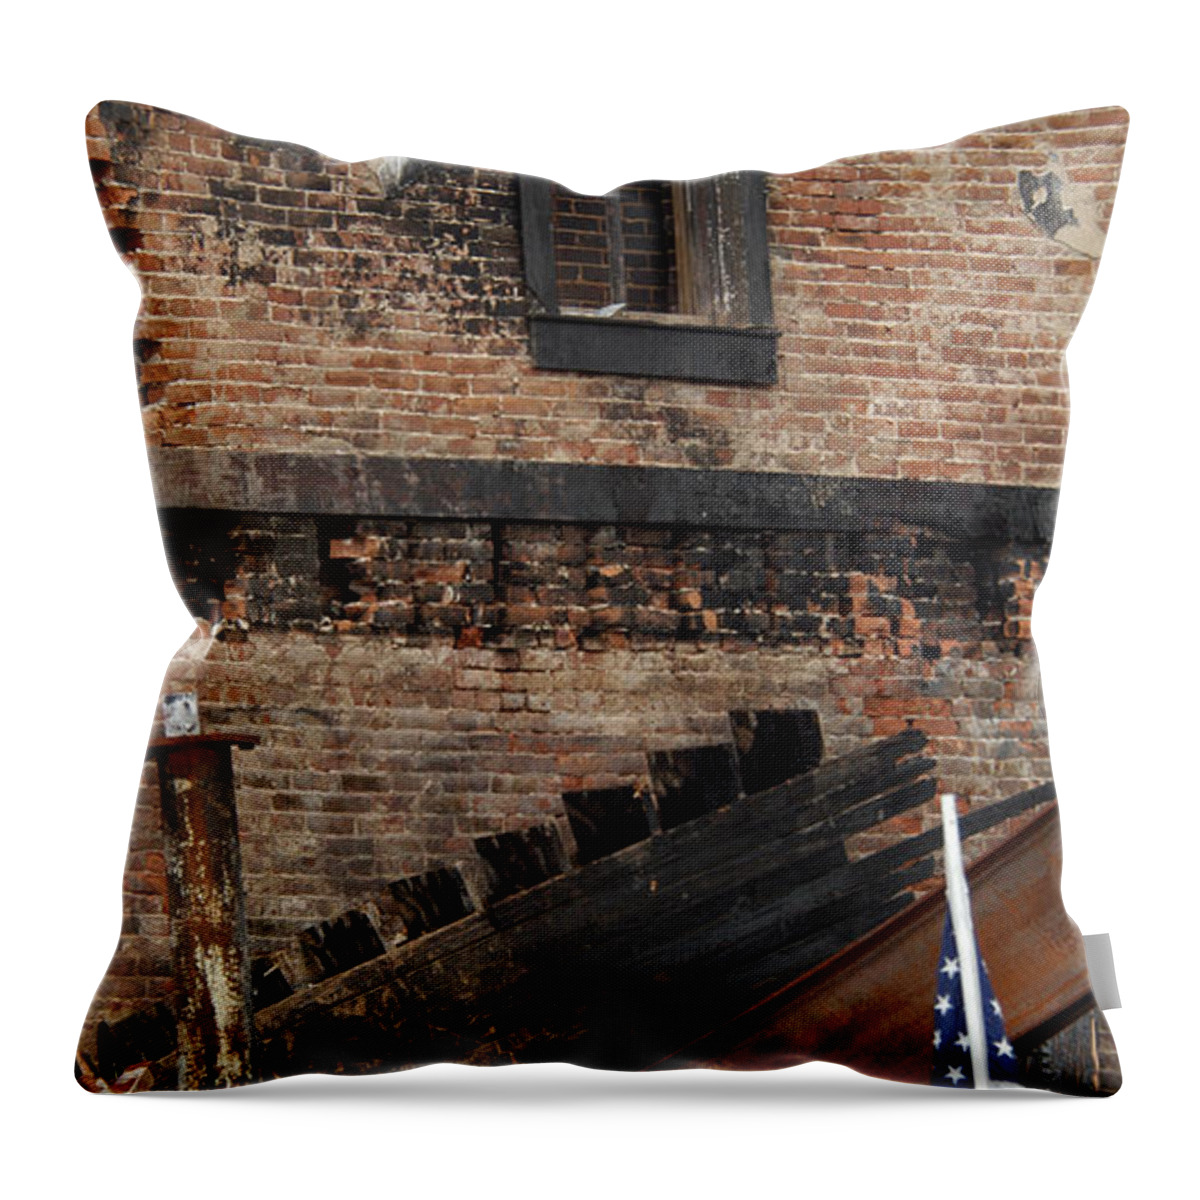 Stand By Me Throw Pillow featuring the photograph Stand By Me by Wanda Brandon